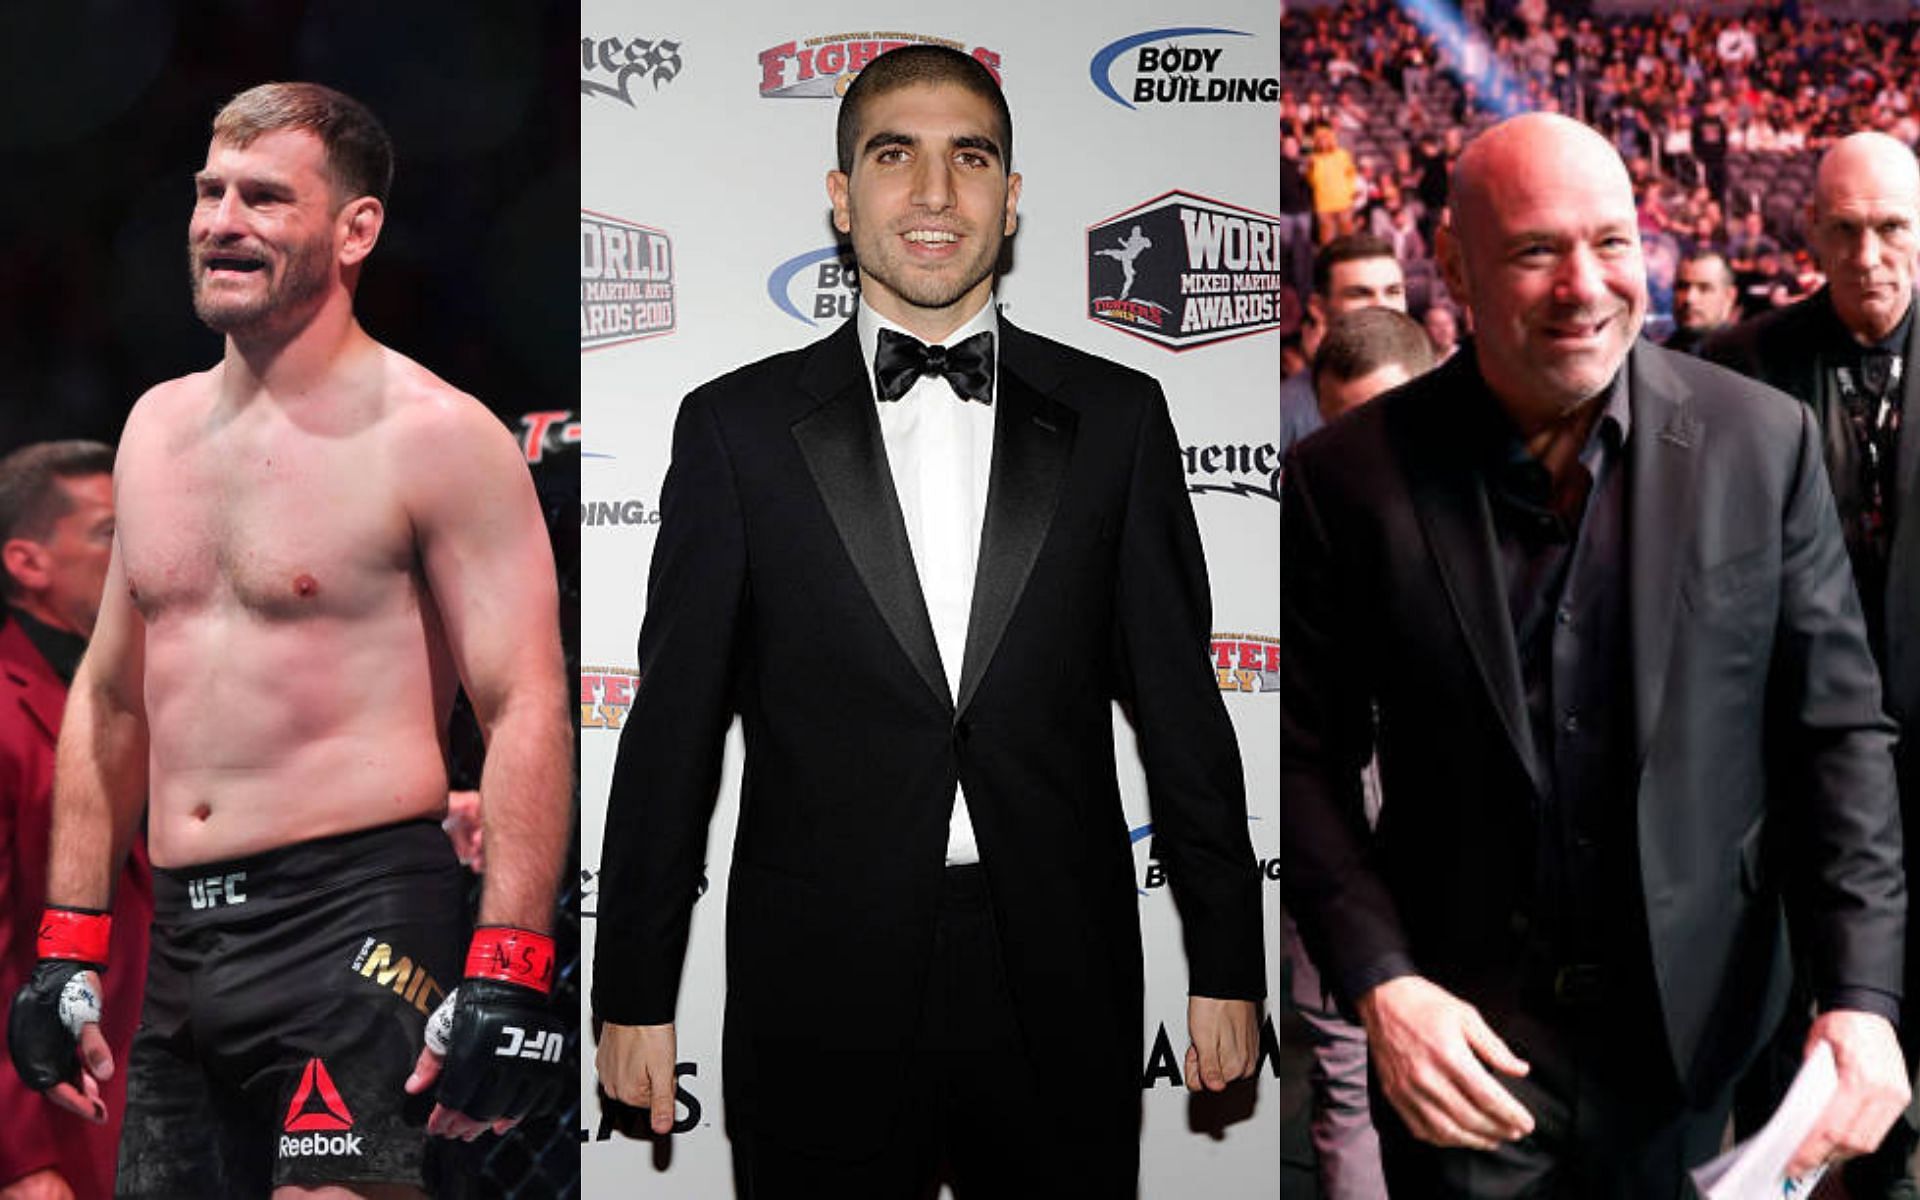 From left to right: Stipe Miocic, Ariel Helwani, and Dana White